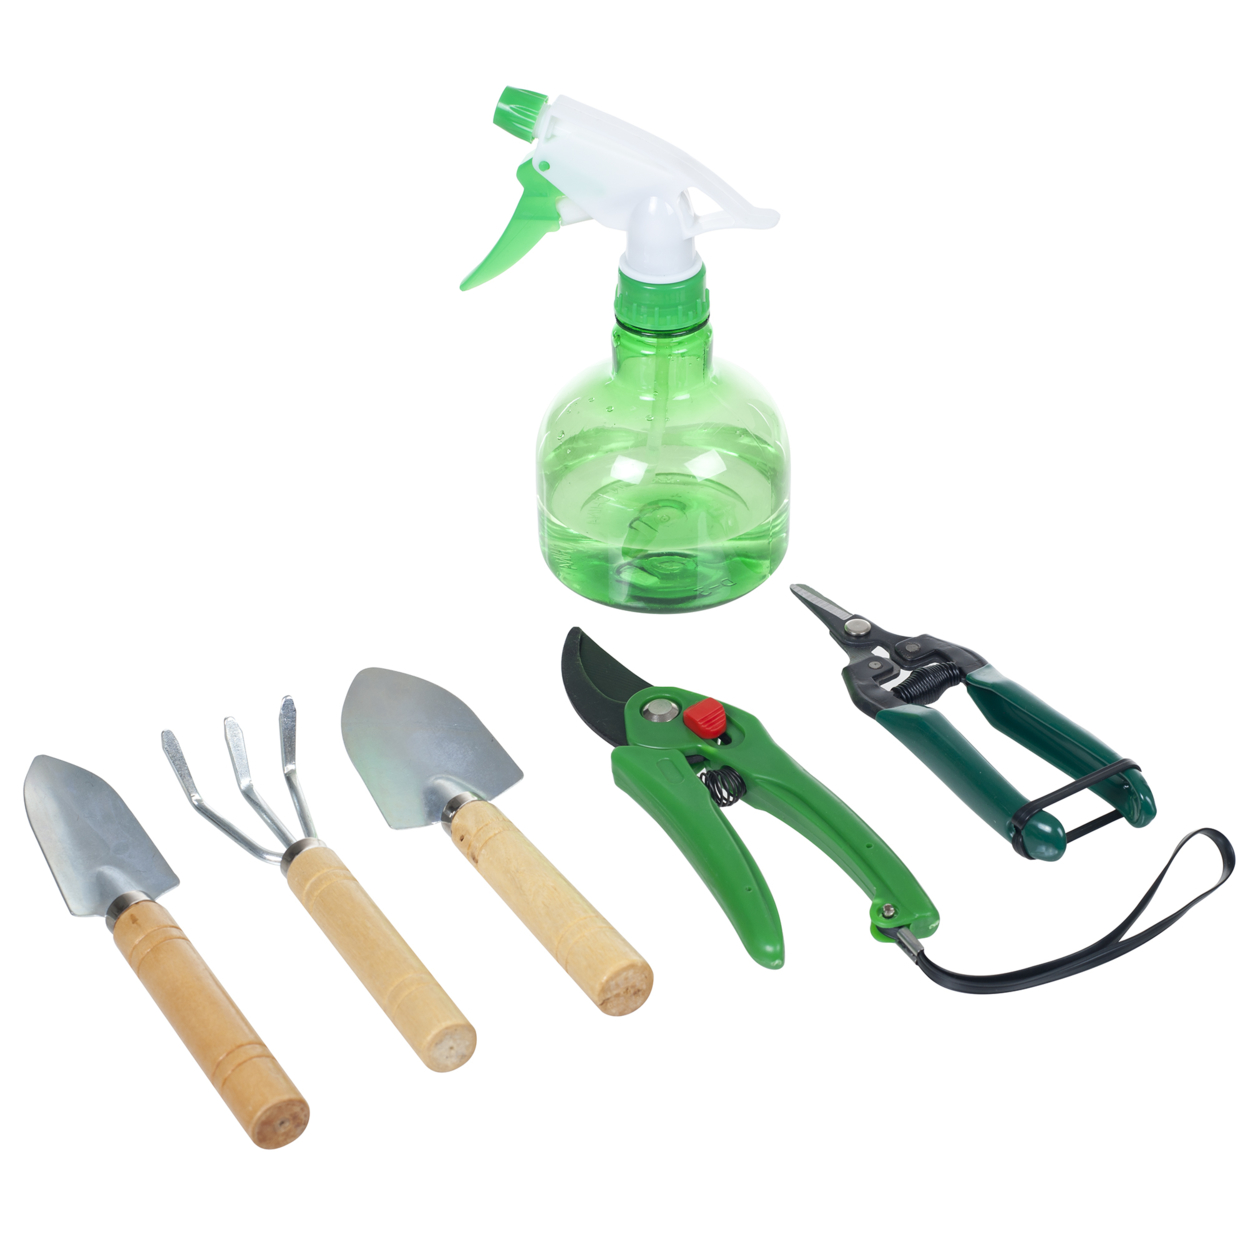 7 Piece Small Gardening Tool Set – Mini Planting And Repotting Kit And Carrying Tote Bag Organizer